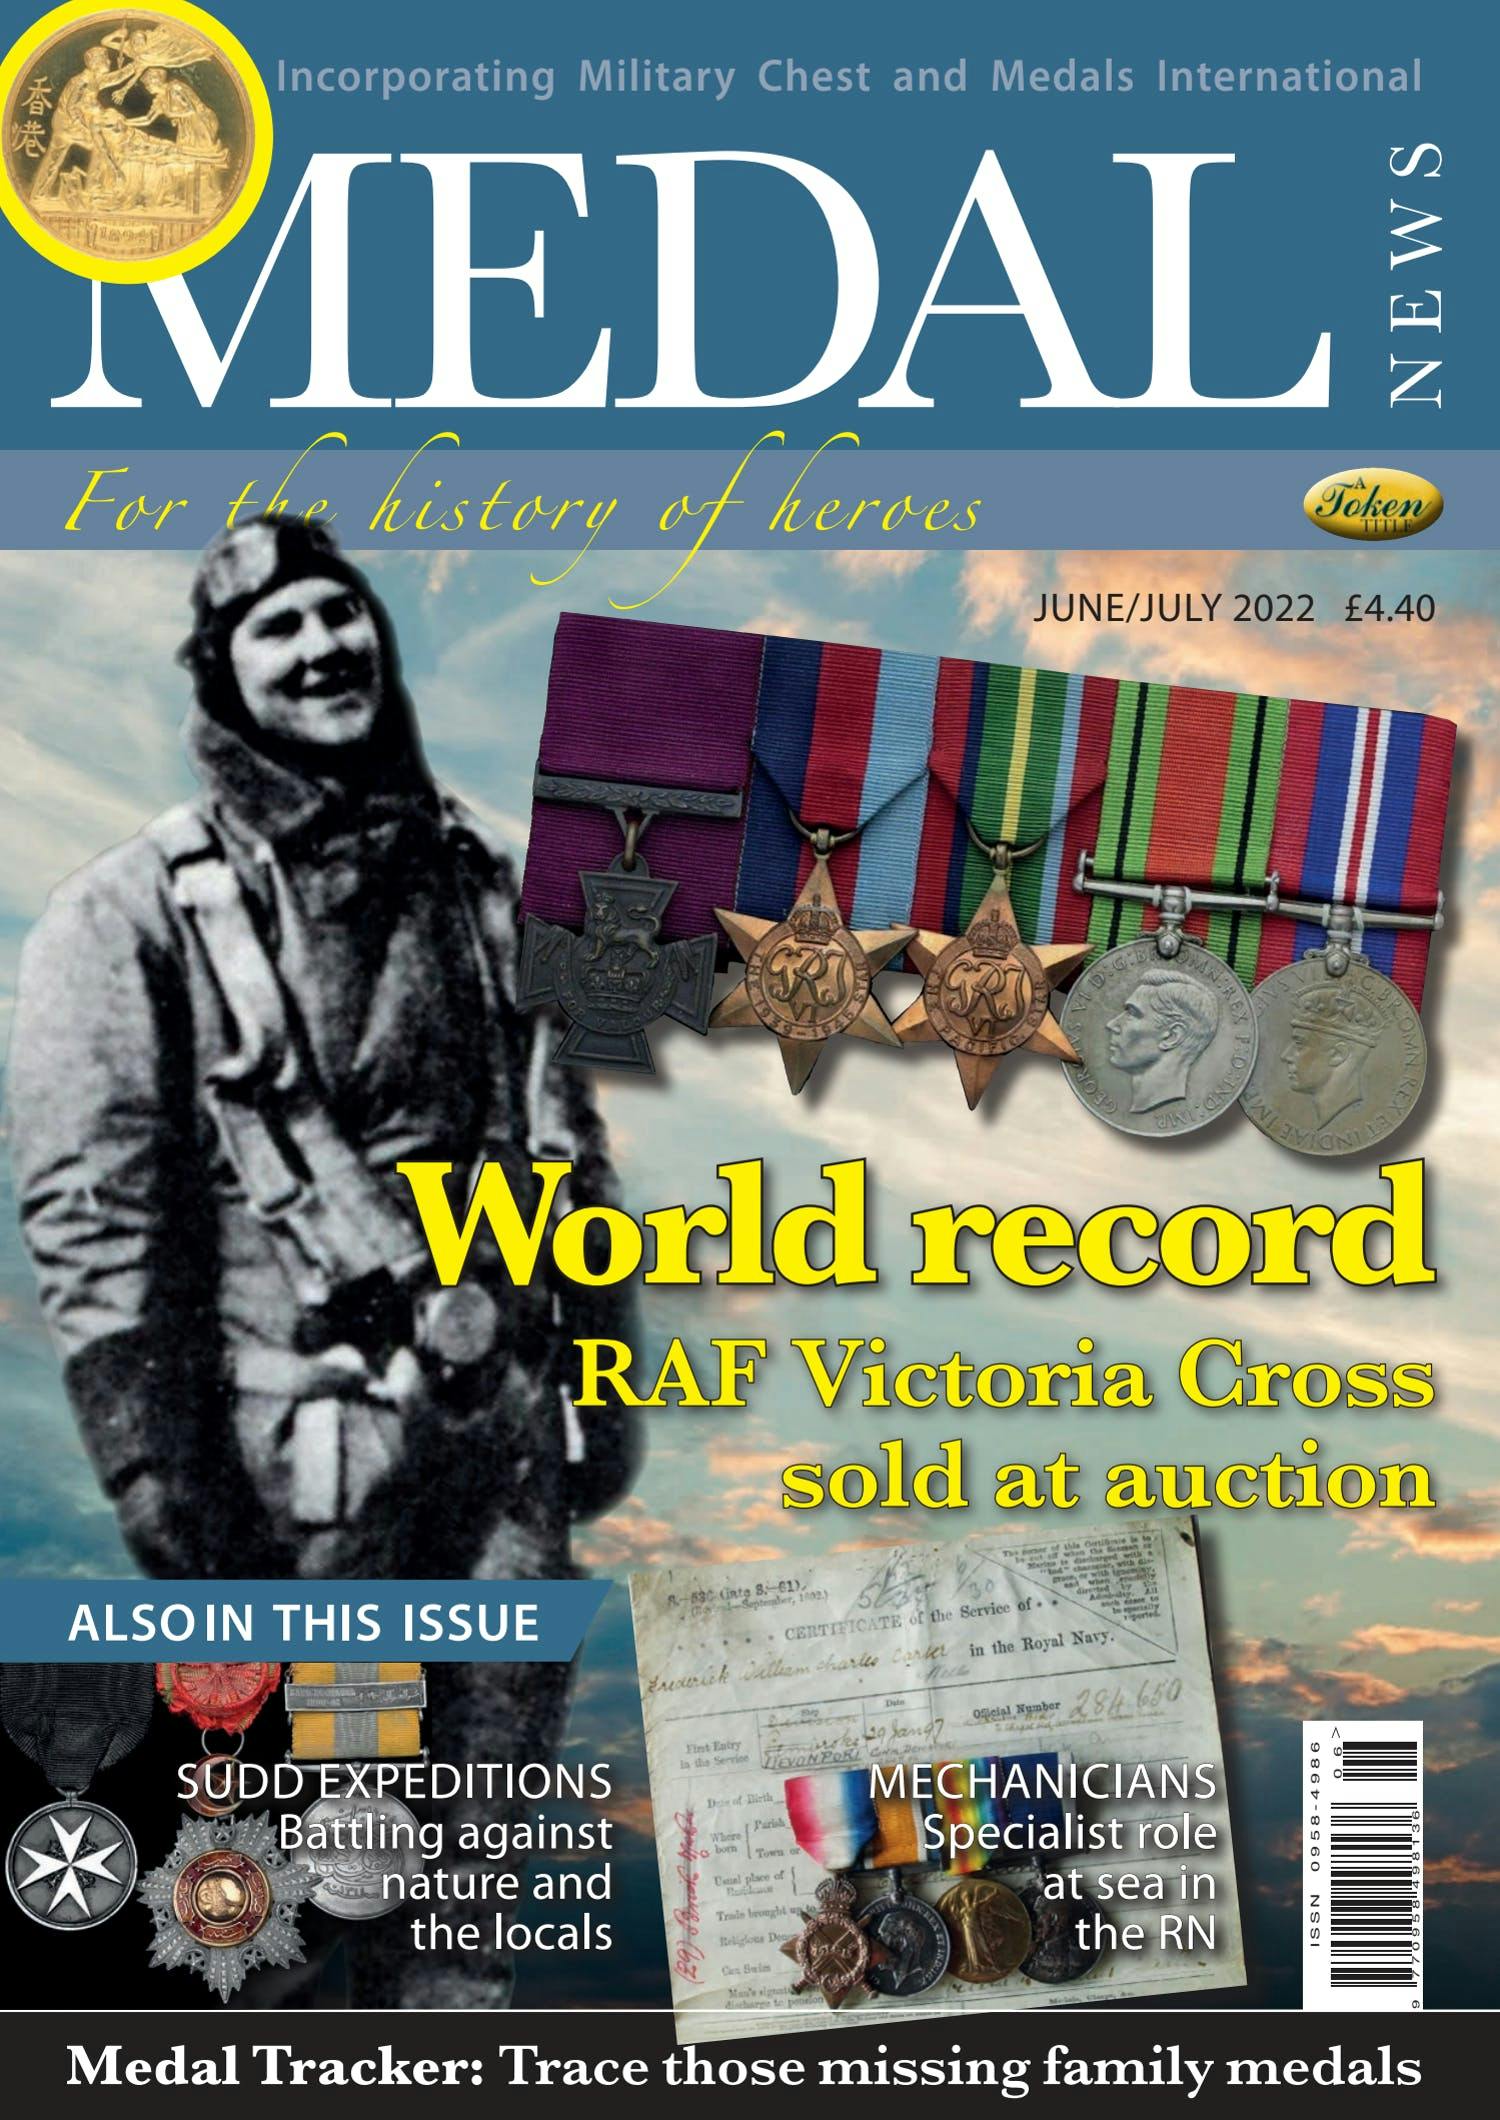 The front cover of Medal News, Volume 60, Number 6, June 2022